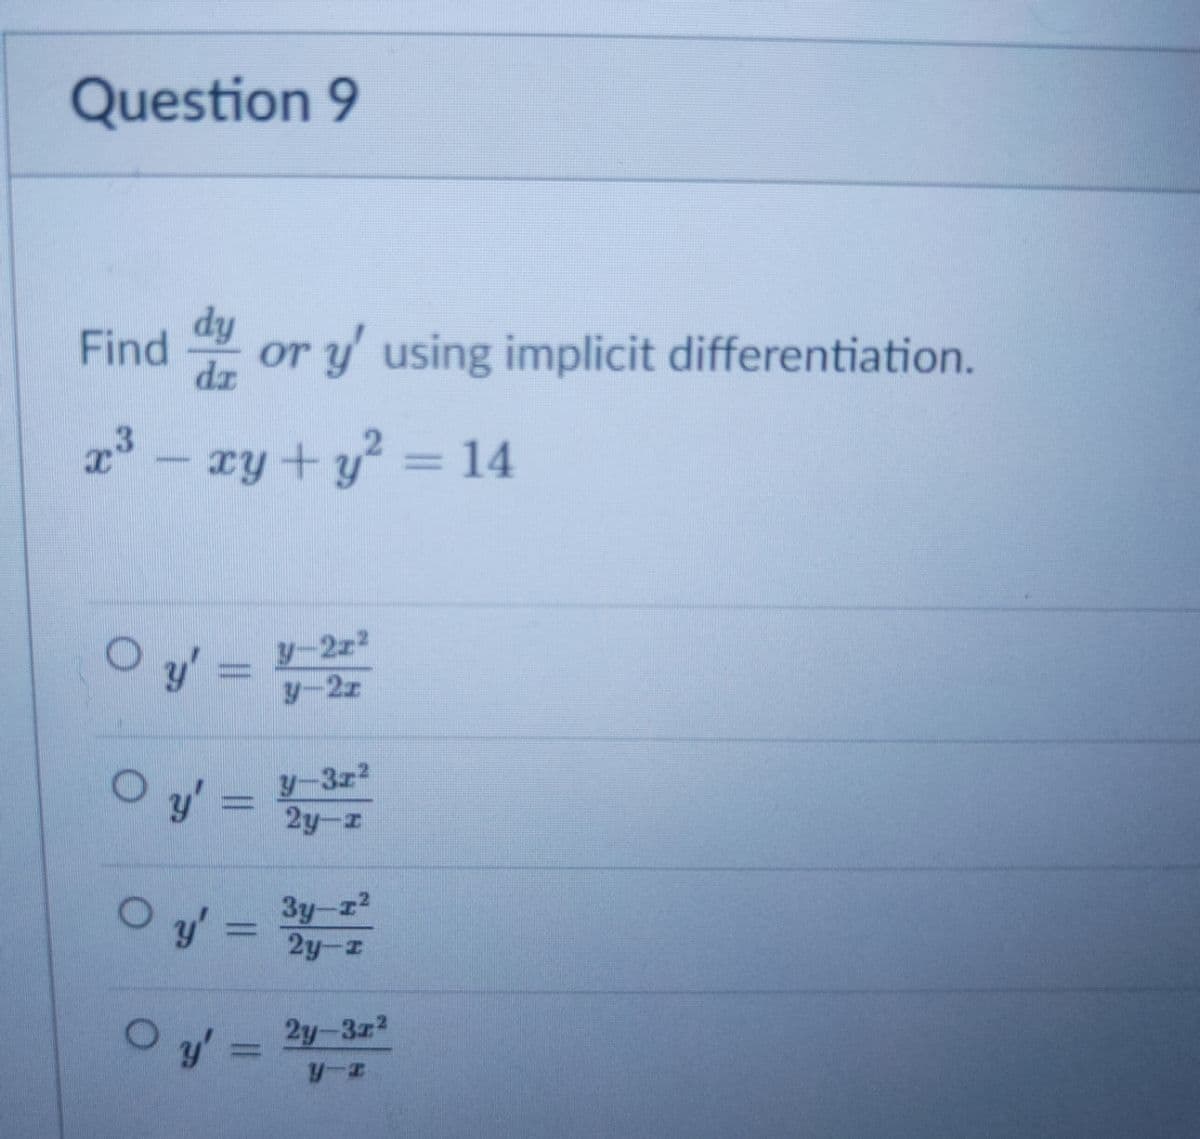 Question 9
dy
Find or y' using implicit differentiation.
dz
a - zy + y = 14
Oy' =
y-2z2
y-2z
O y' =
y-3z2
2y-z
O y'
3y-z2
2y-z
2y-3z2
